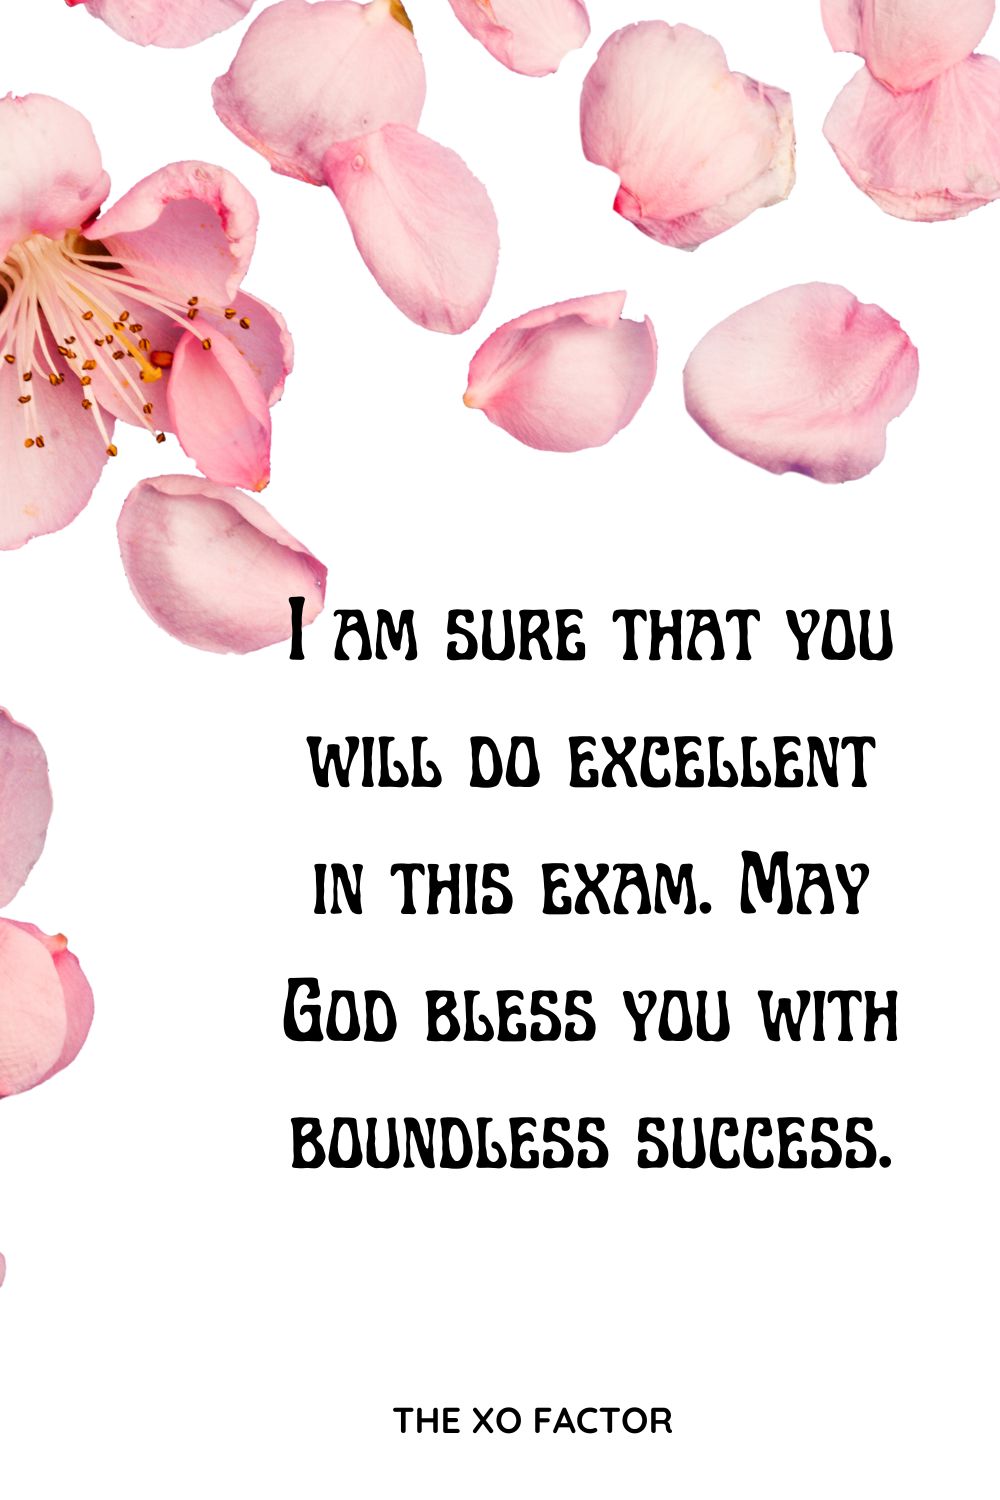 I am sure that you will do excellent in this exam. May God bless you with boundless success.